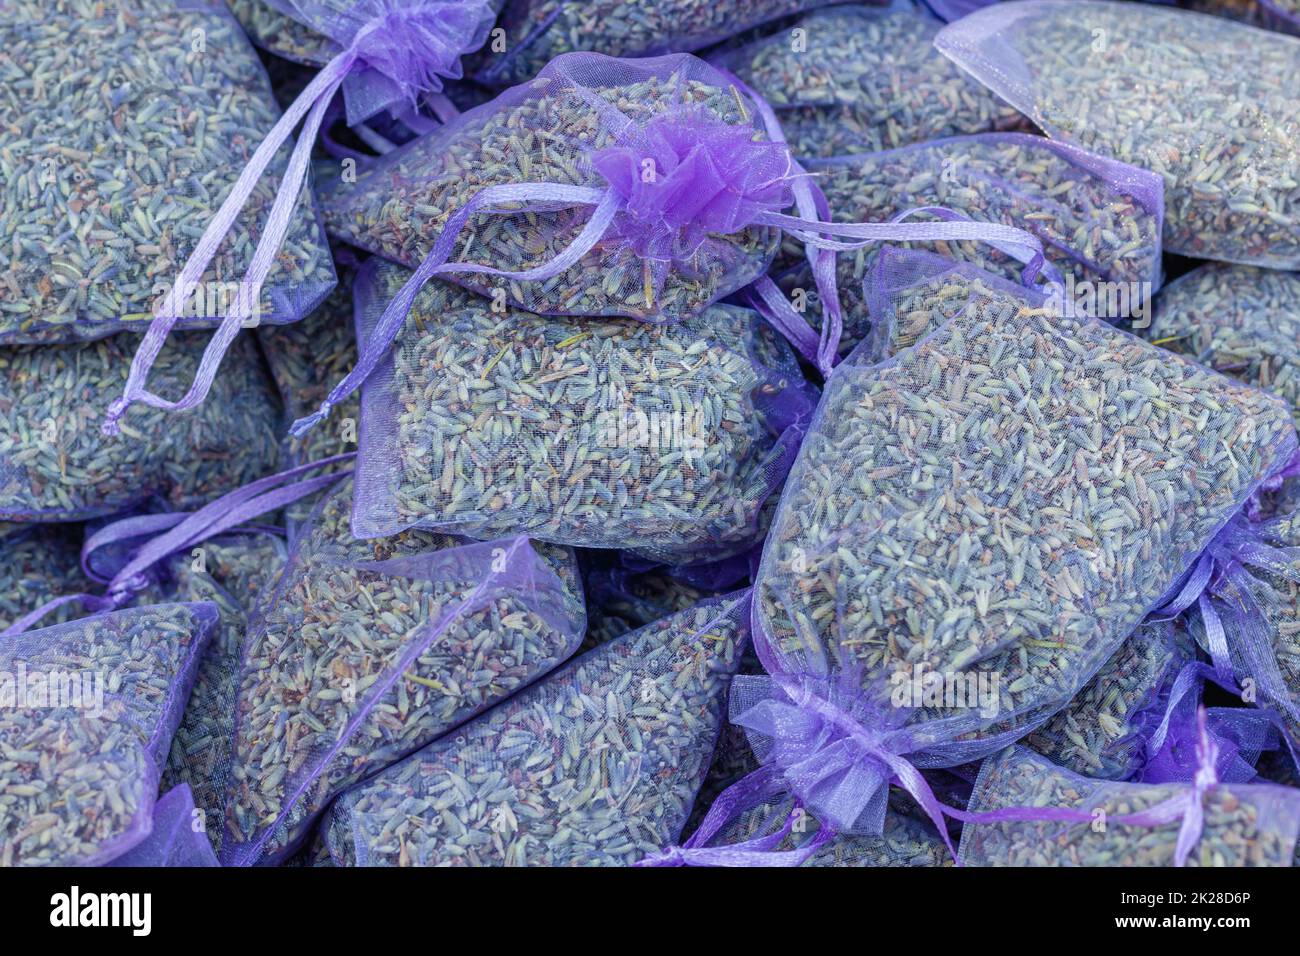 Some sachets with dried lavender flowers as room scent at a sales stand Stock Photo